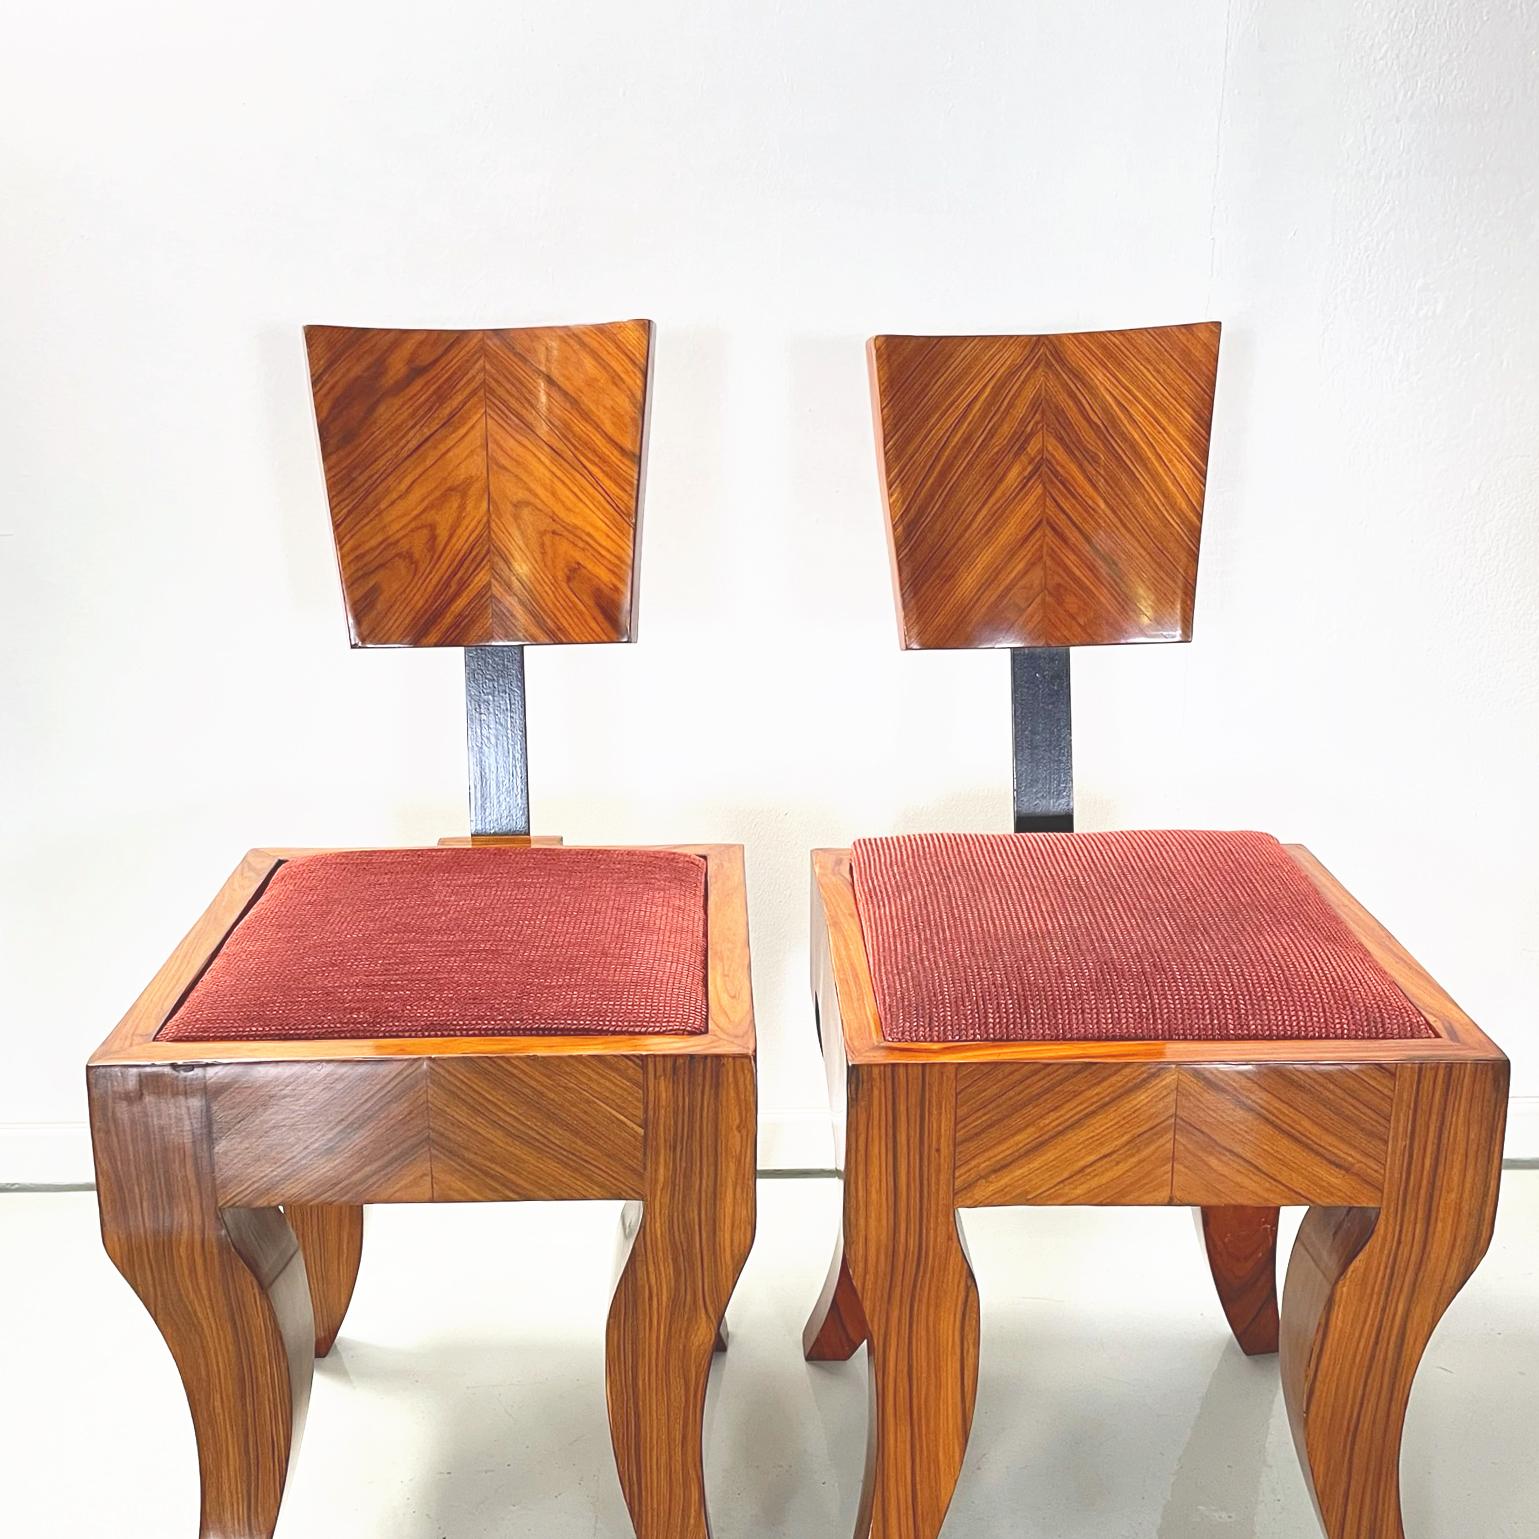 Italian Art Deco Chairs in Solid Wood, Black Metal and Red Fabric, 1920s-1930s For Sale 3